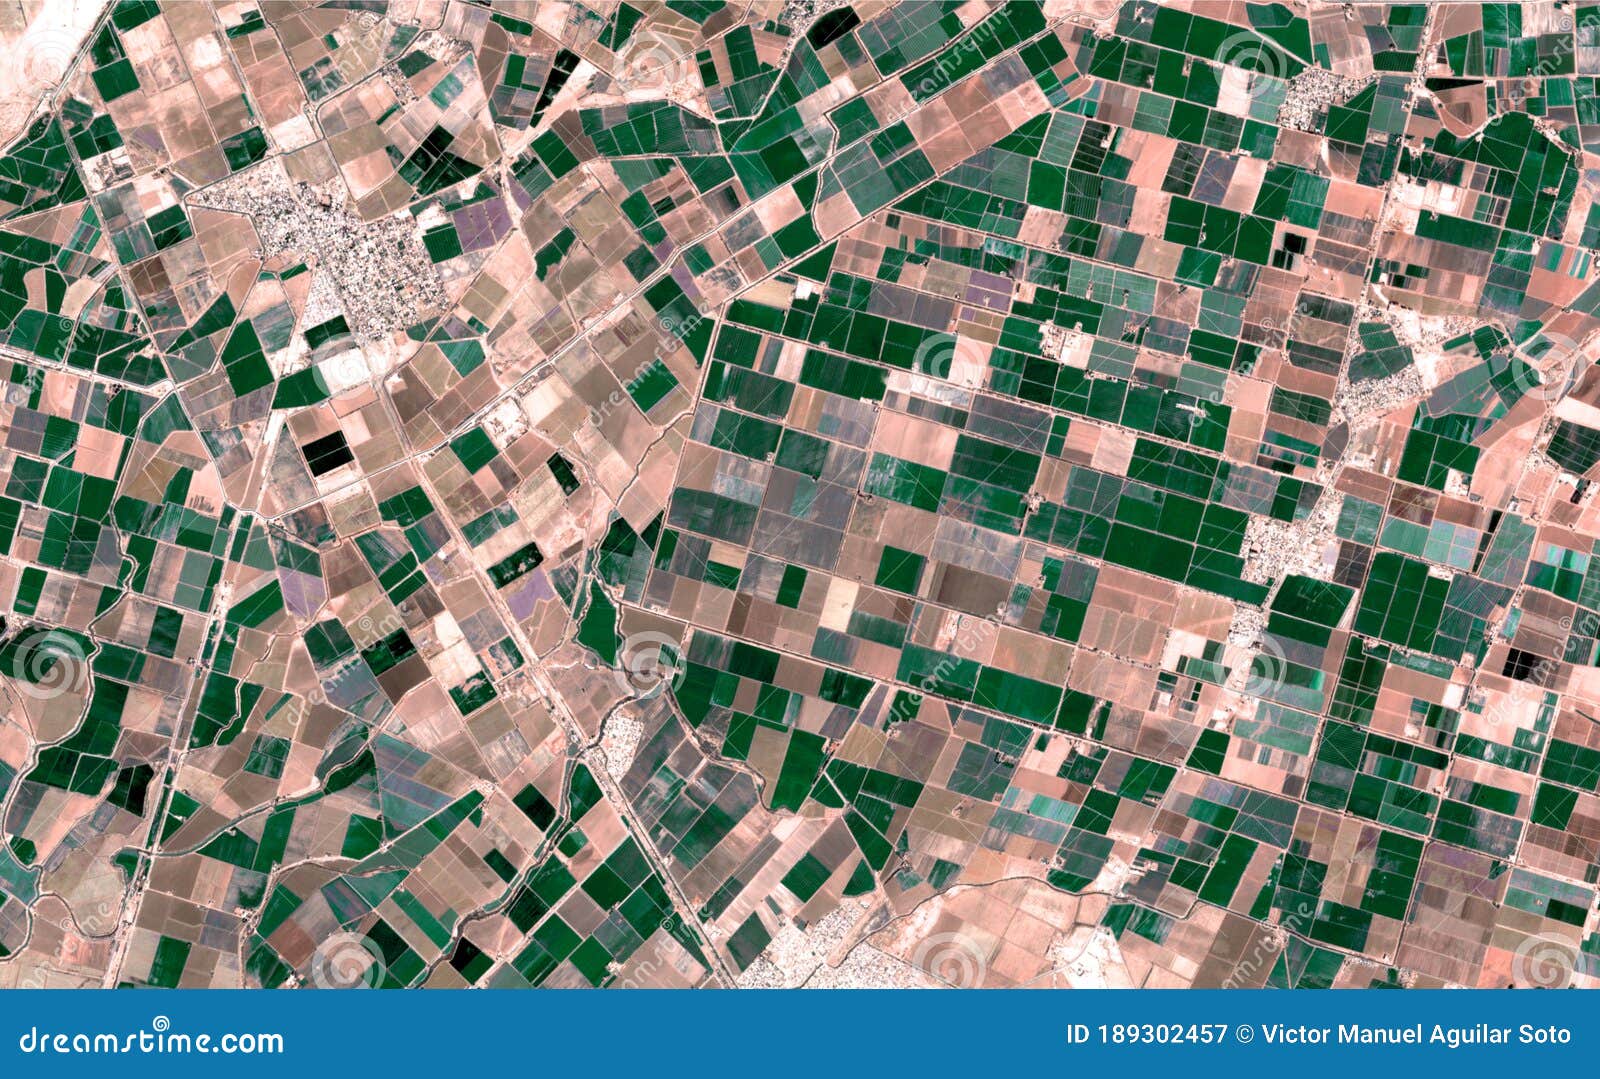 satellite image where crops are seen over the sonora desert, mexico.